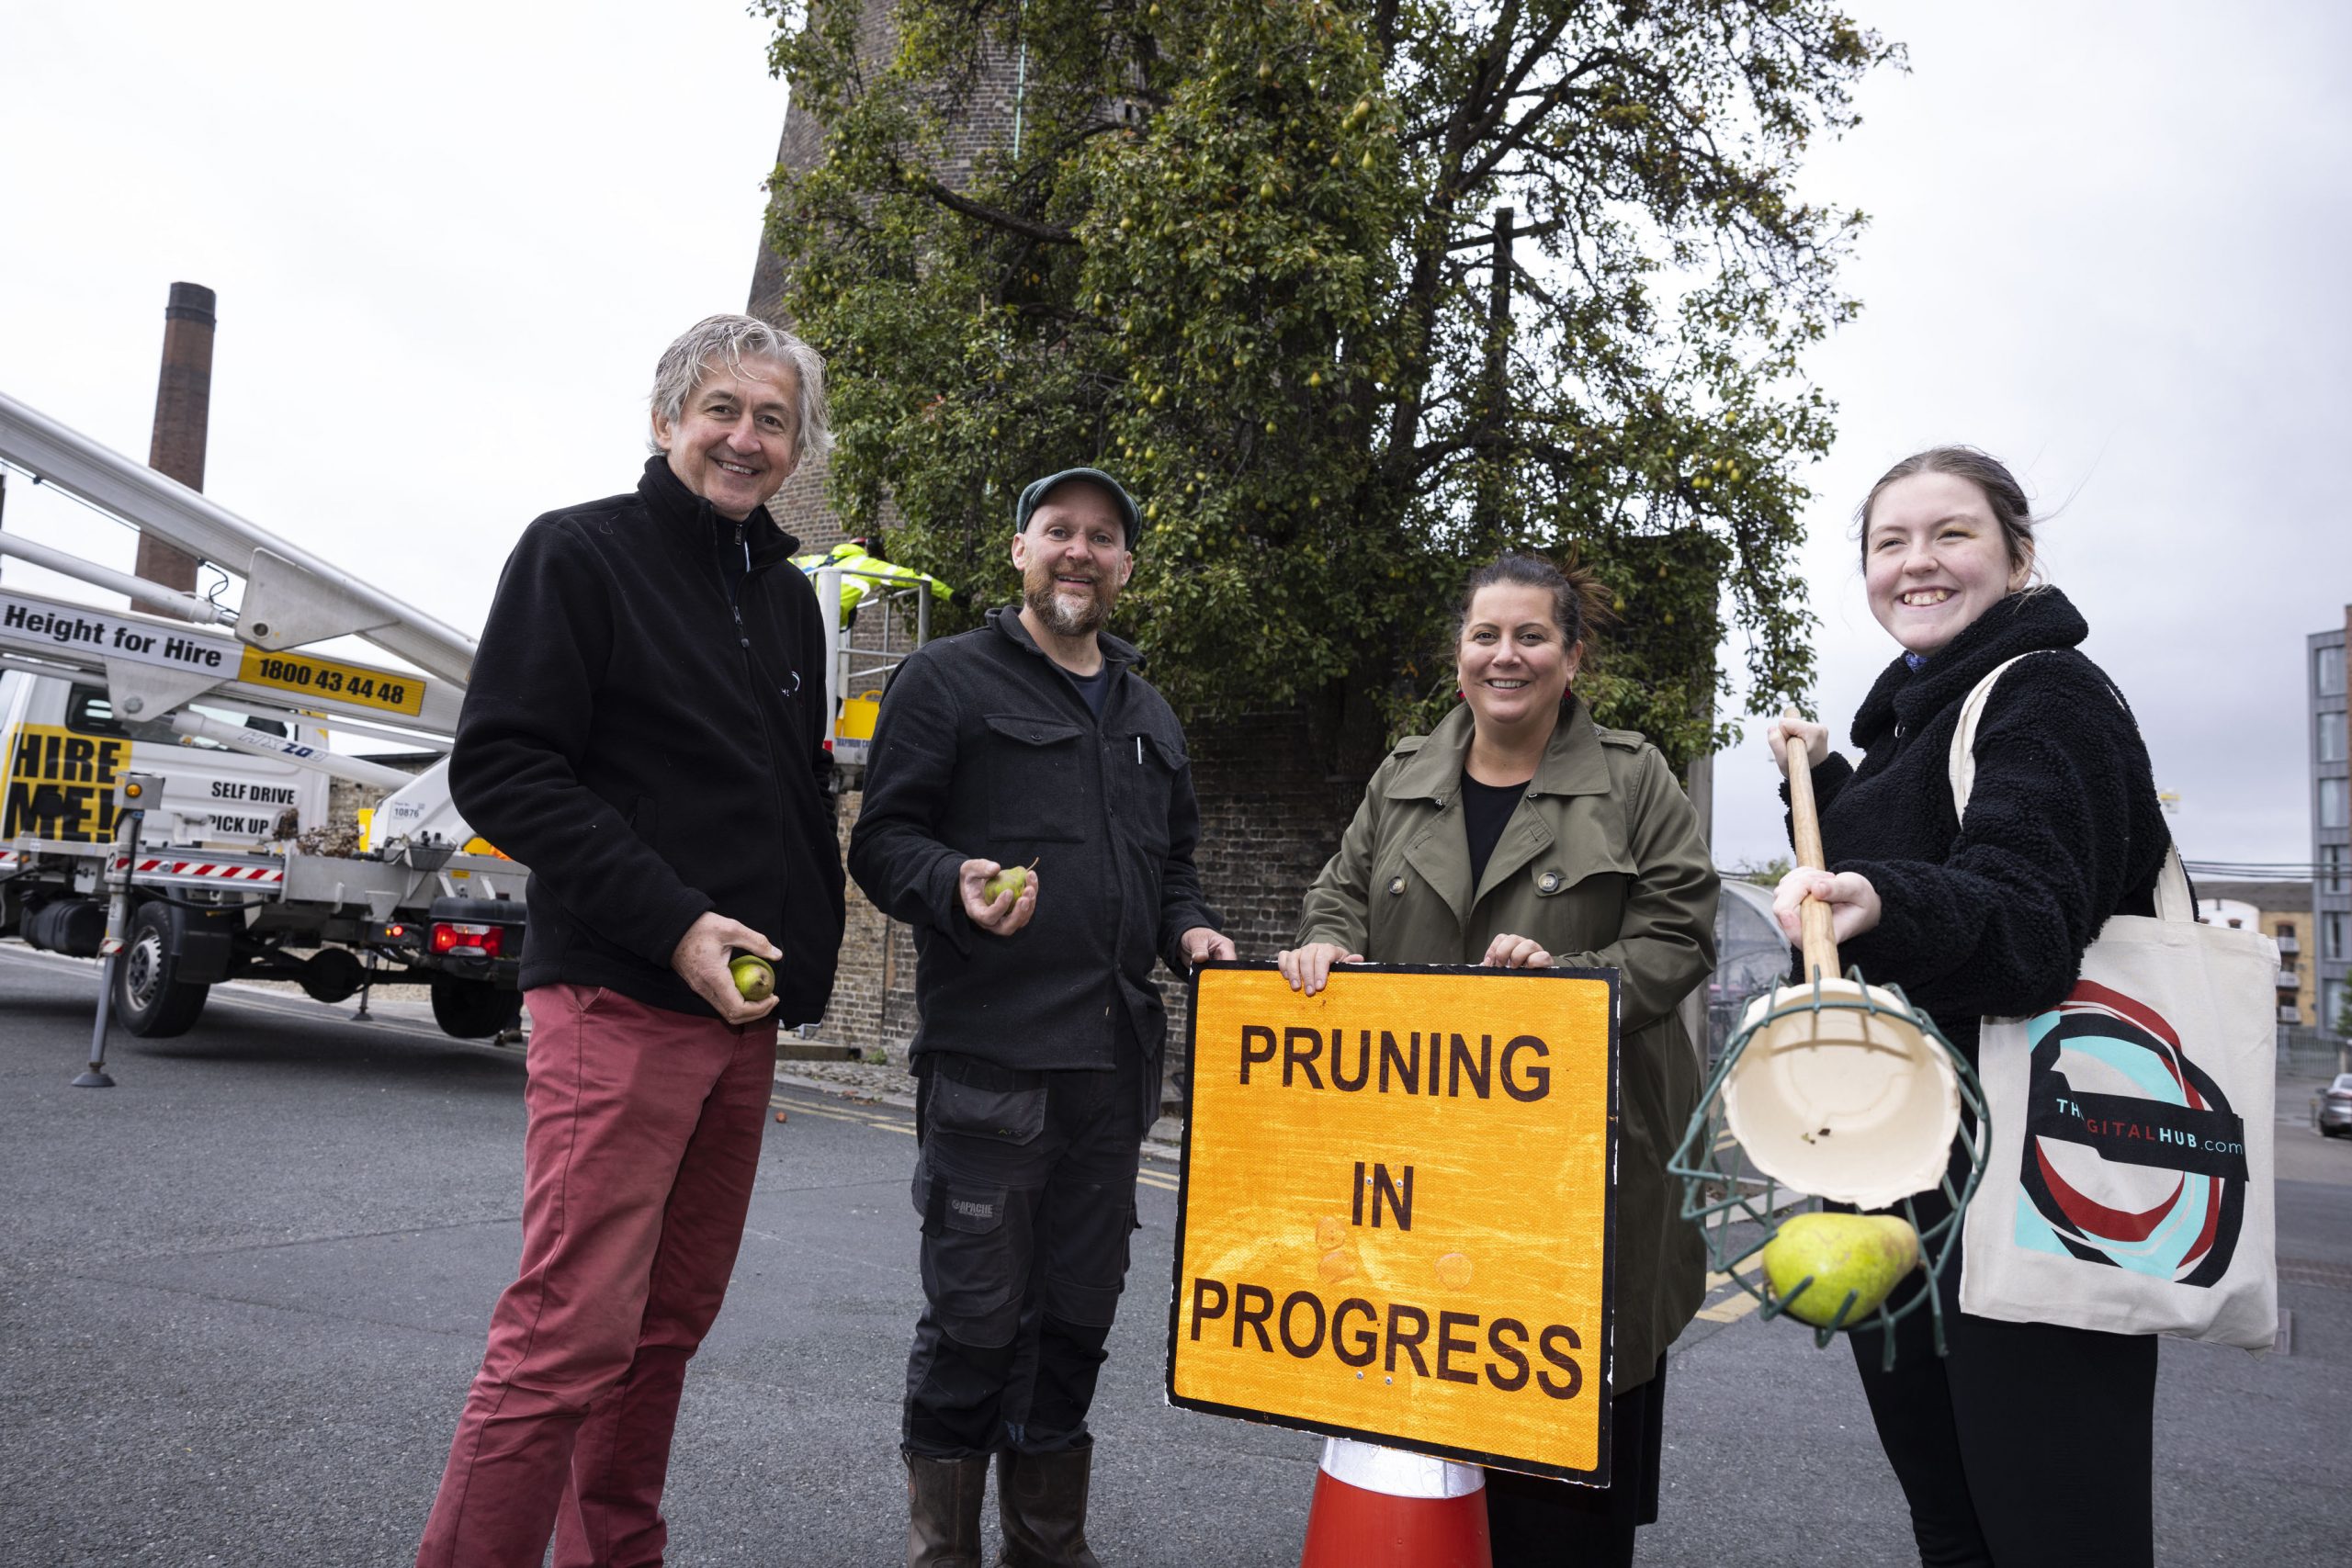 A group of 4 people standing in front of the pear tree at The Digital Hub. Two people are holding green pears, one person is standing in front of a sign, that reads 'Pruning in progress' and another person is holding a pear picker, which is a long stick with a basket on the top for collecting pears from high branches.